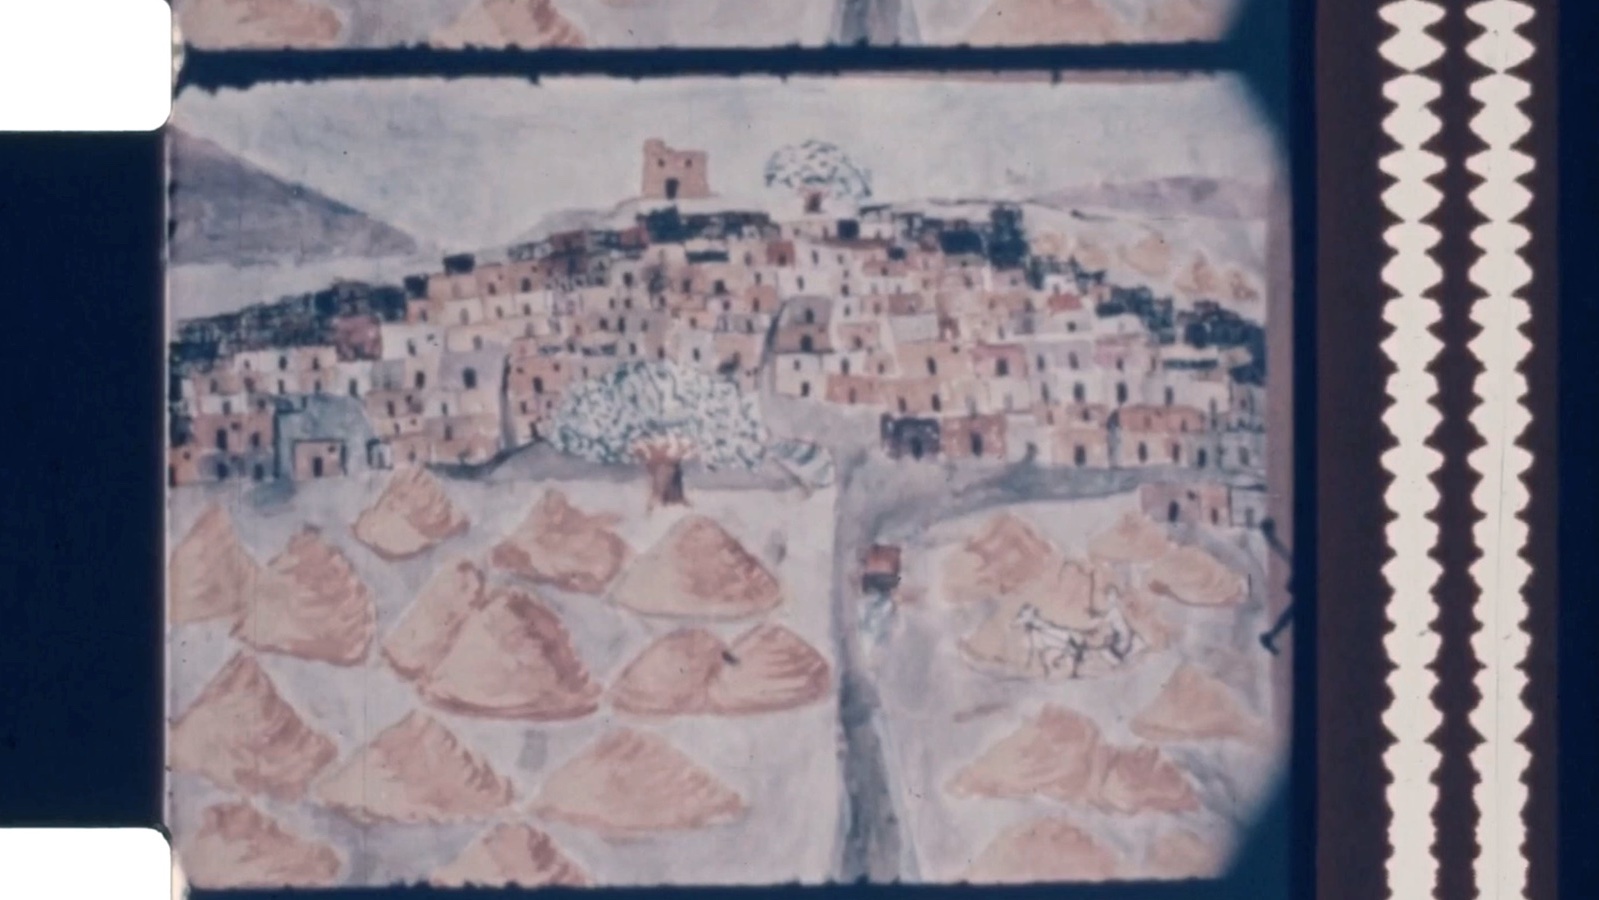 A celluloid image of a drawing of a middle-eastern village